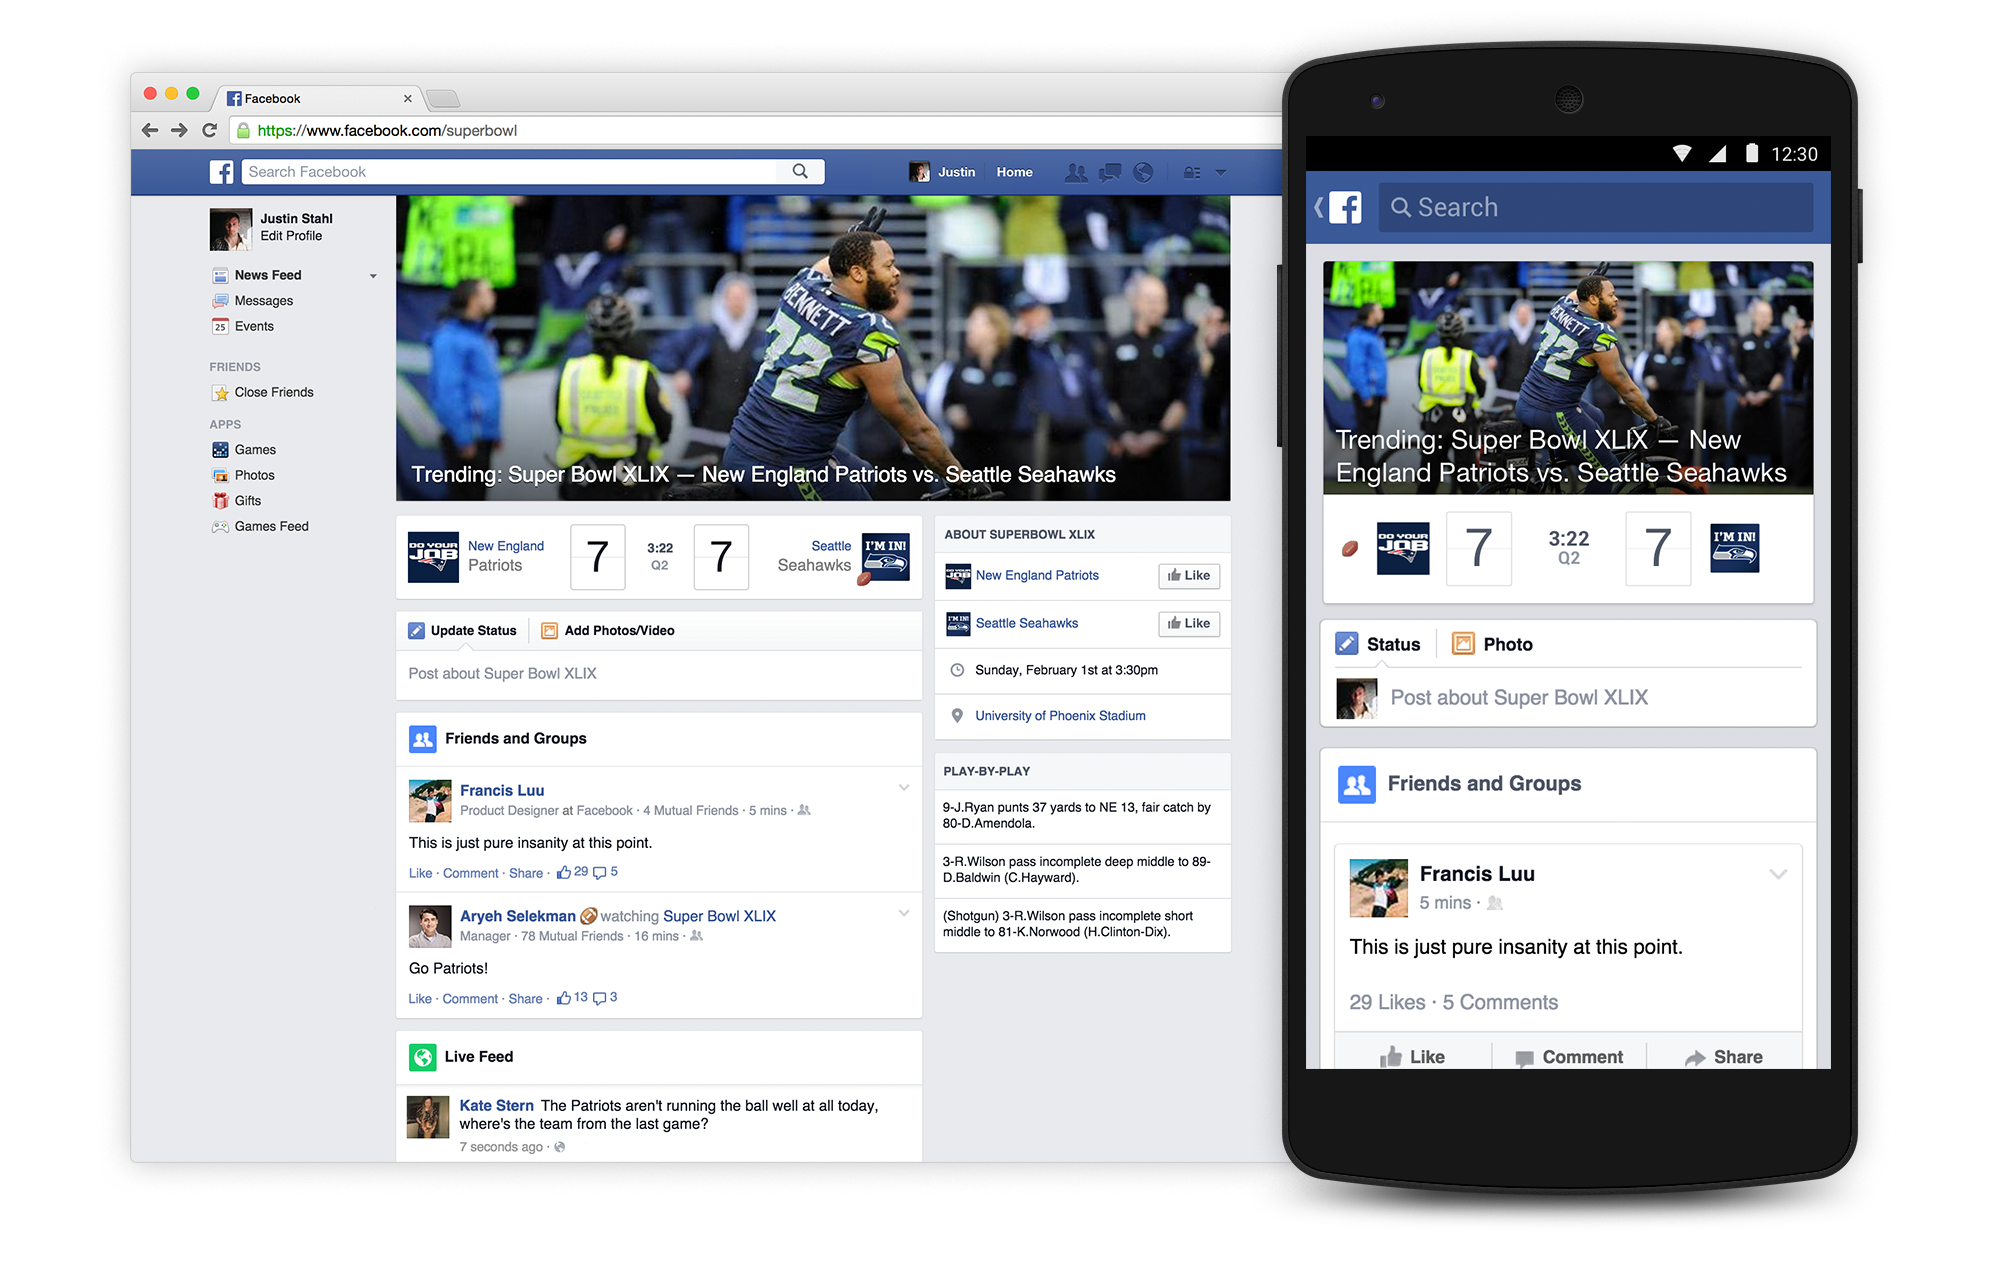 Facebook Launches A Dedicated Super Bowl 2015 Page2000 x 1267